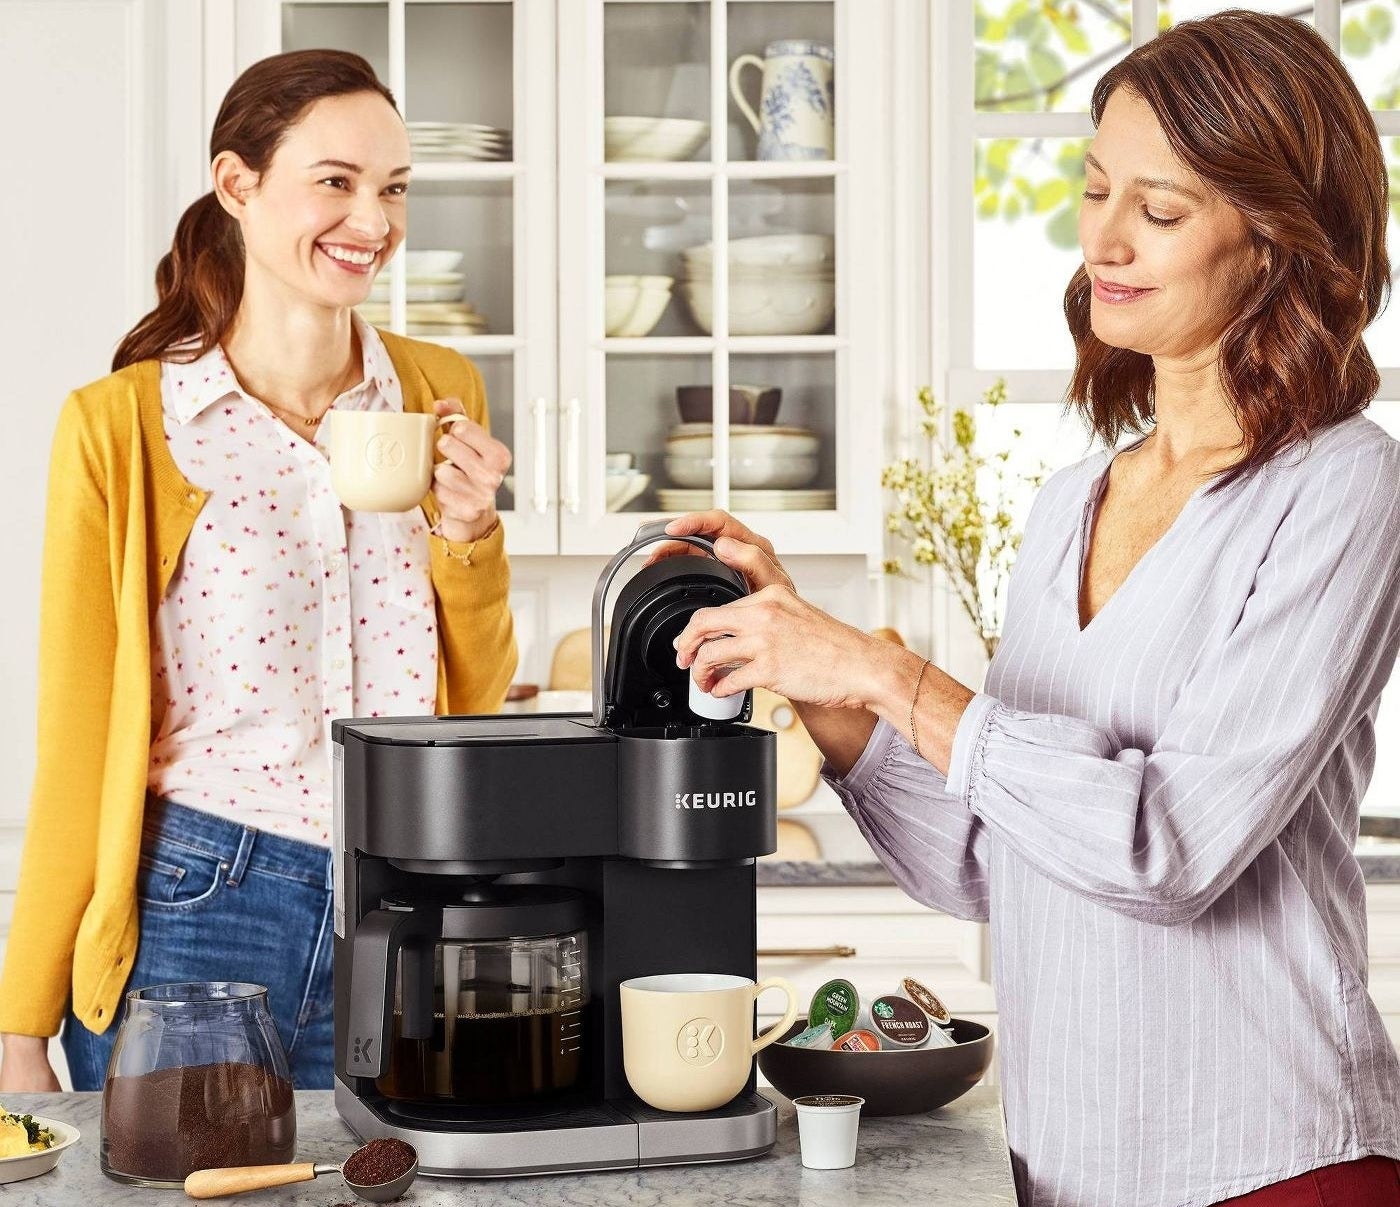 Two models in a kitchen around a Keurig coffee maker